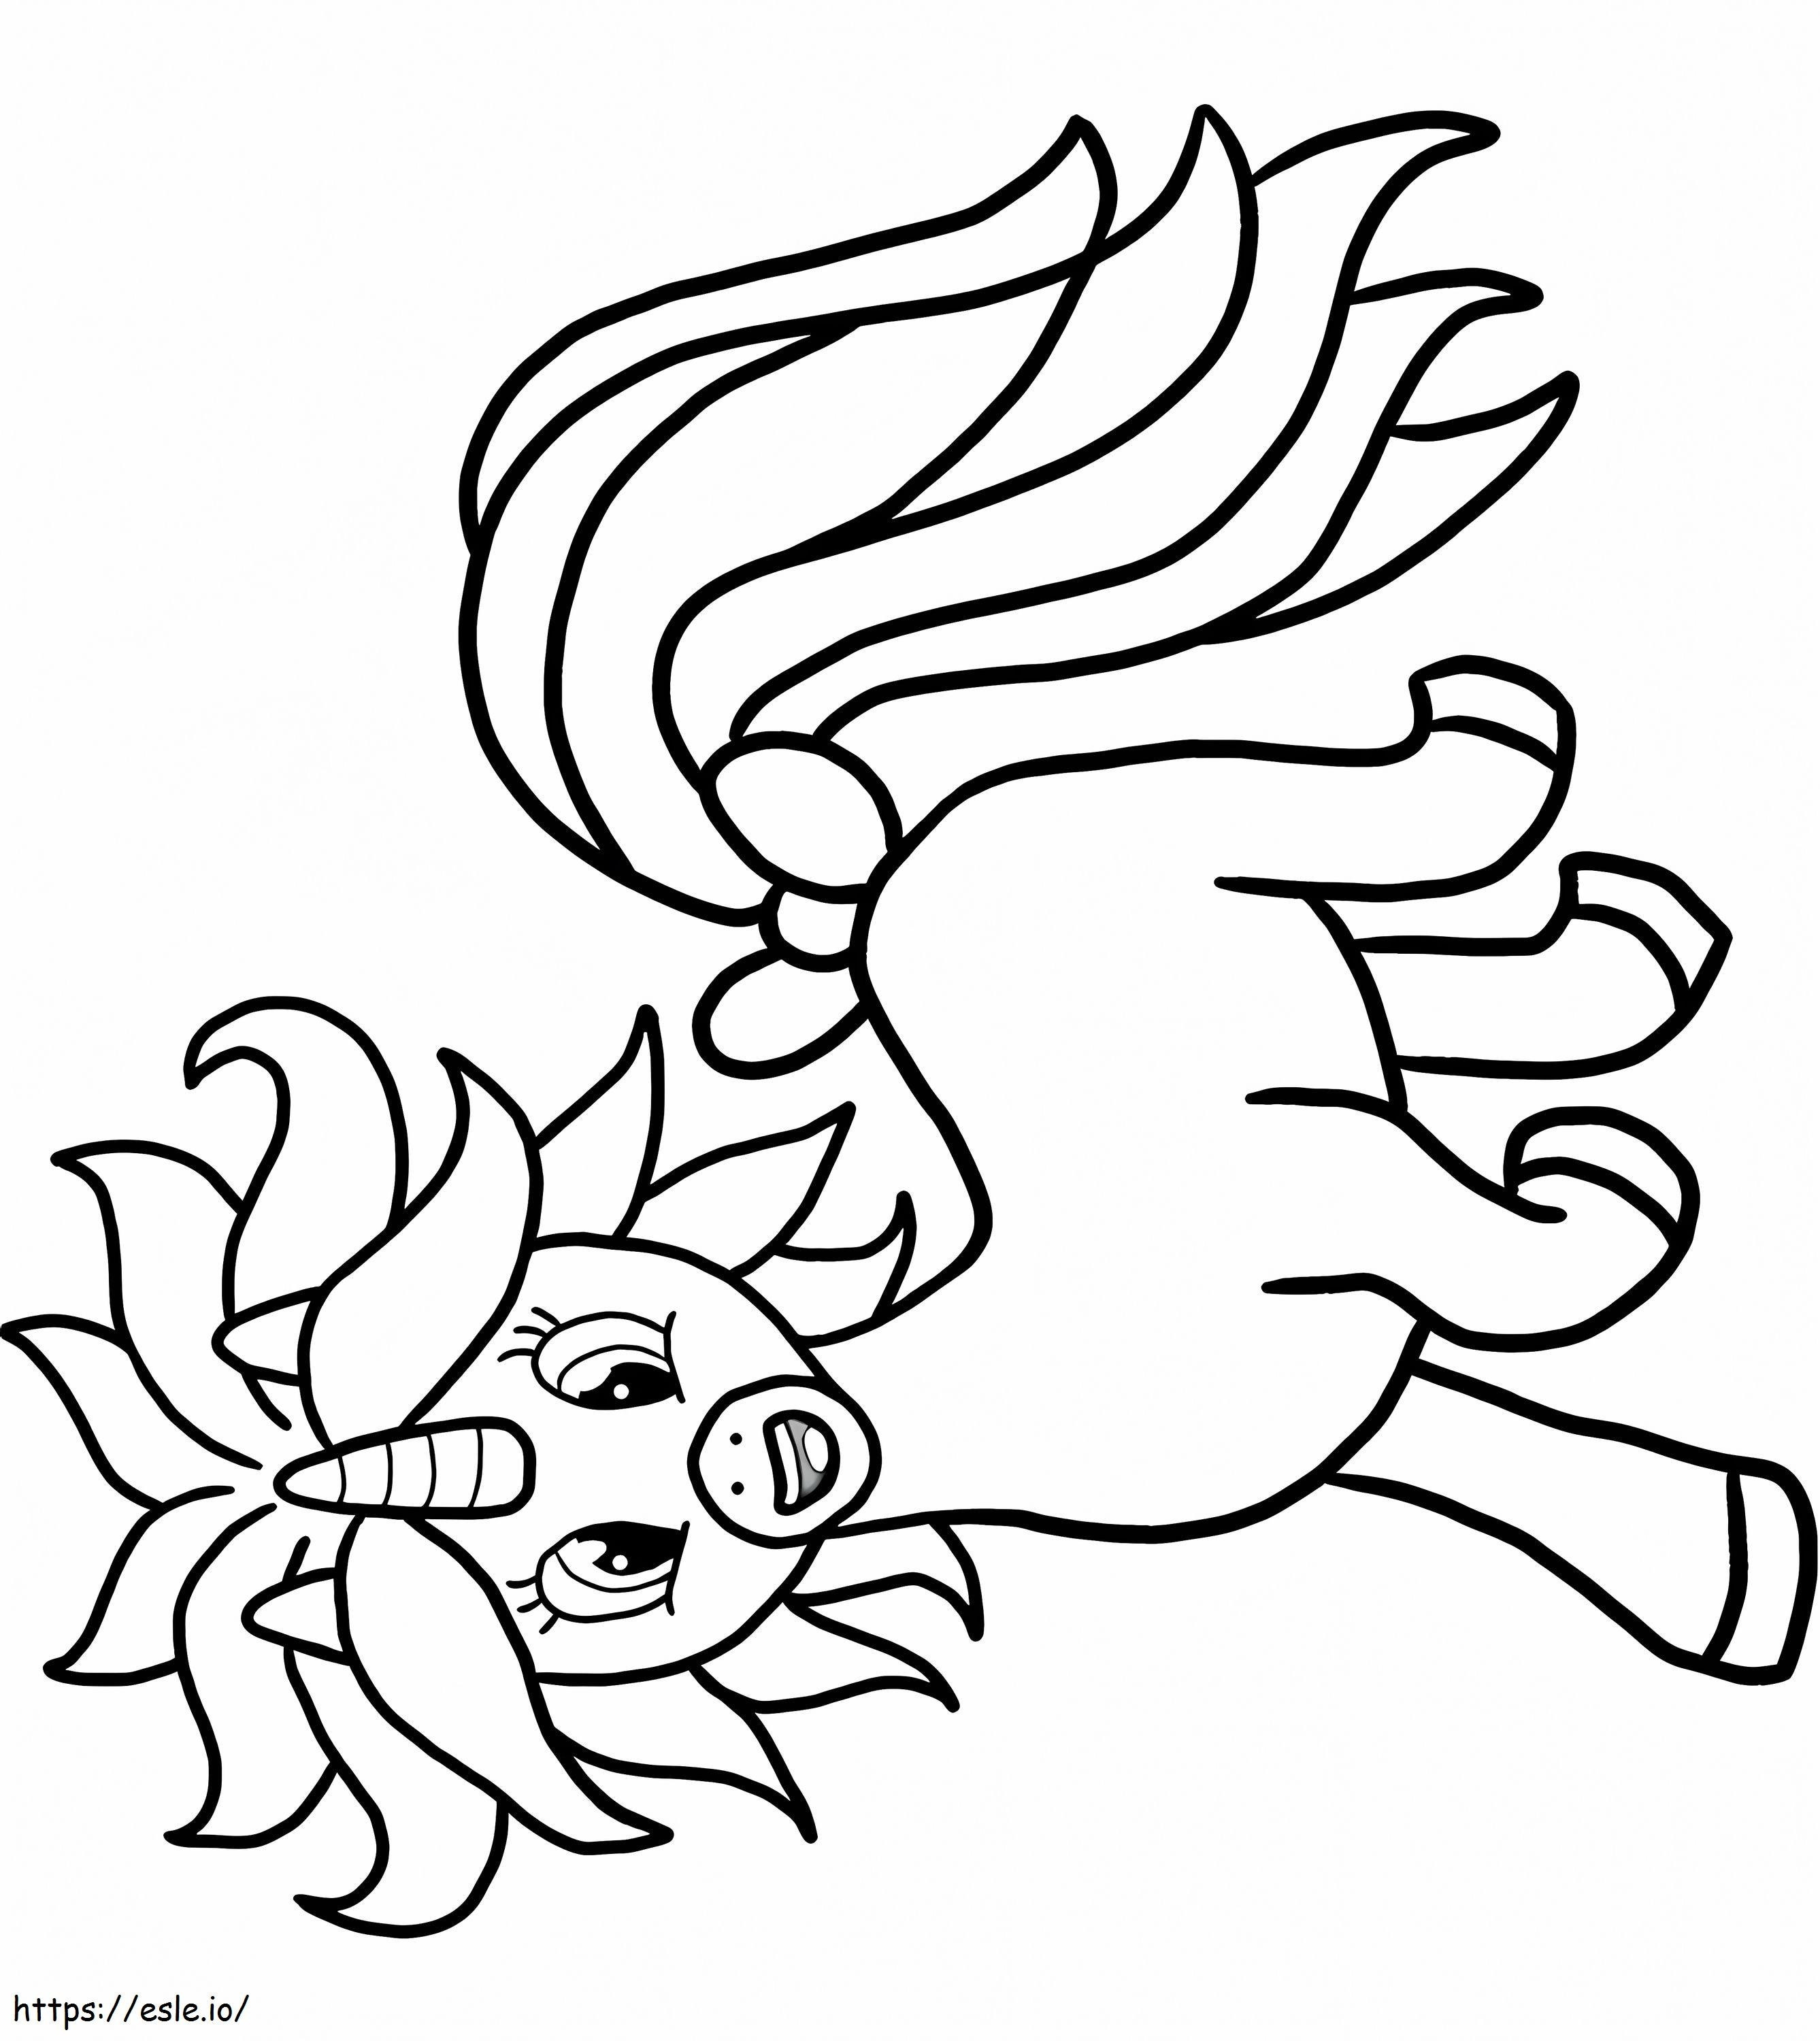 1563238779 Hyperactive Unicorn A4 coloring page